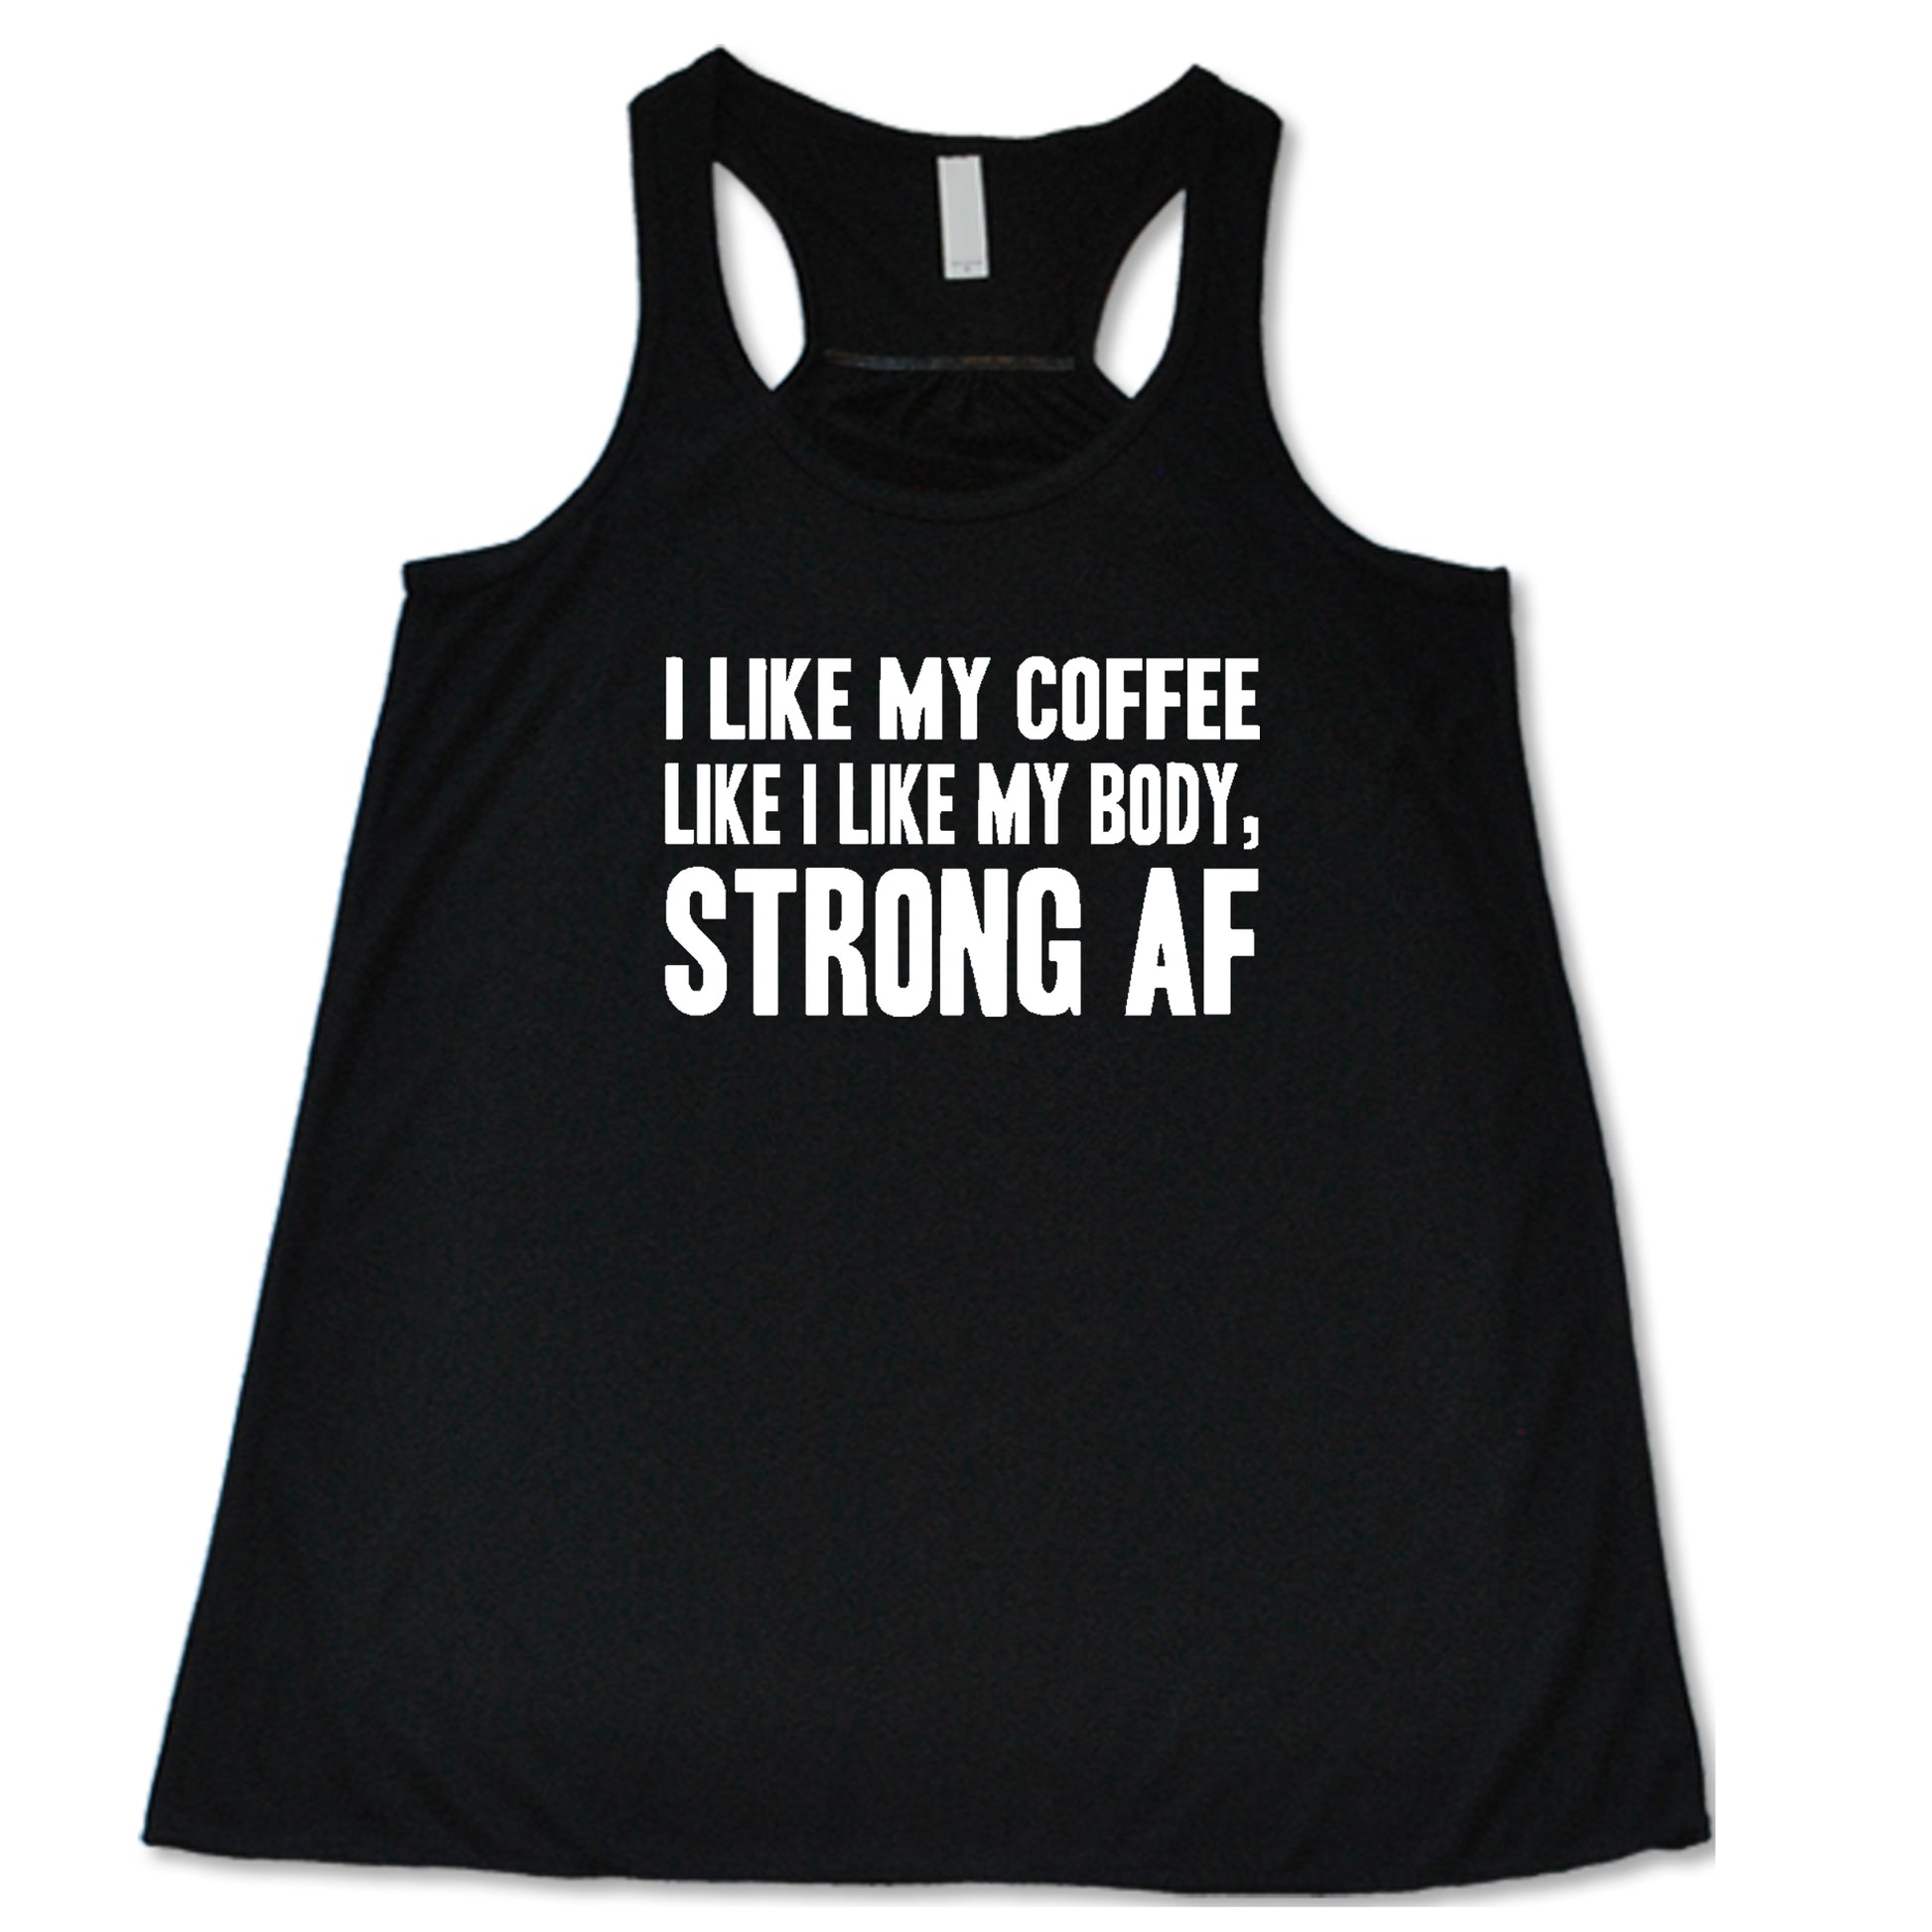 "I Like My Coffee Like I Like My Body Strong AF" quote in white lettering on black racerback shirt